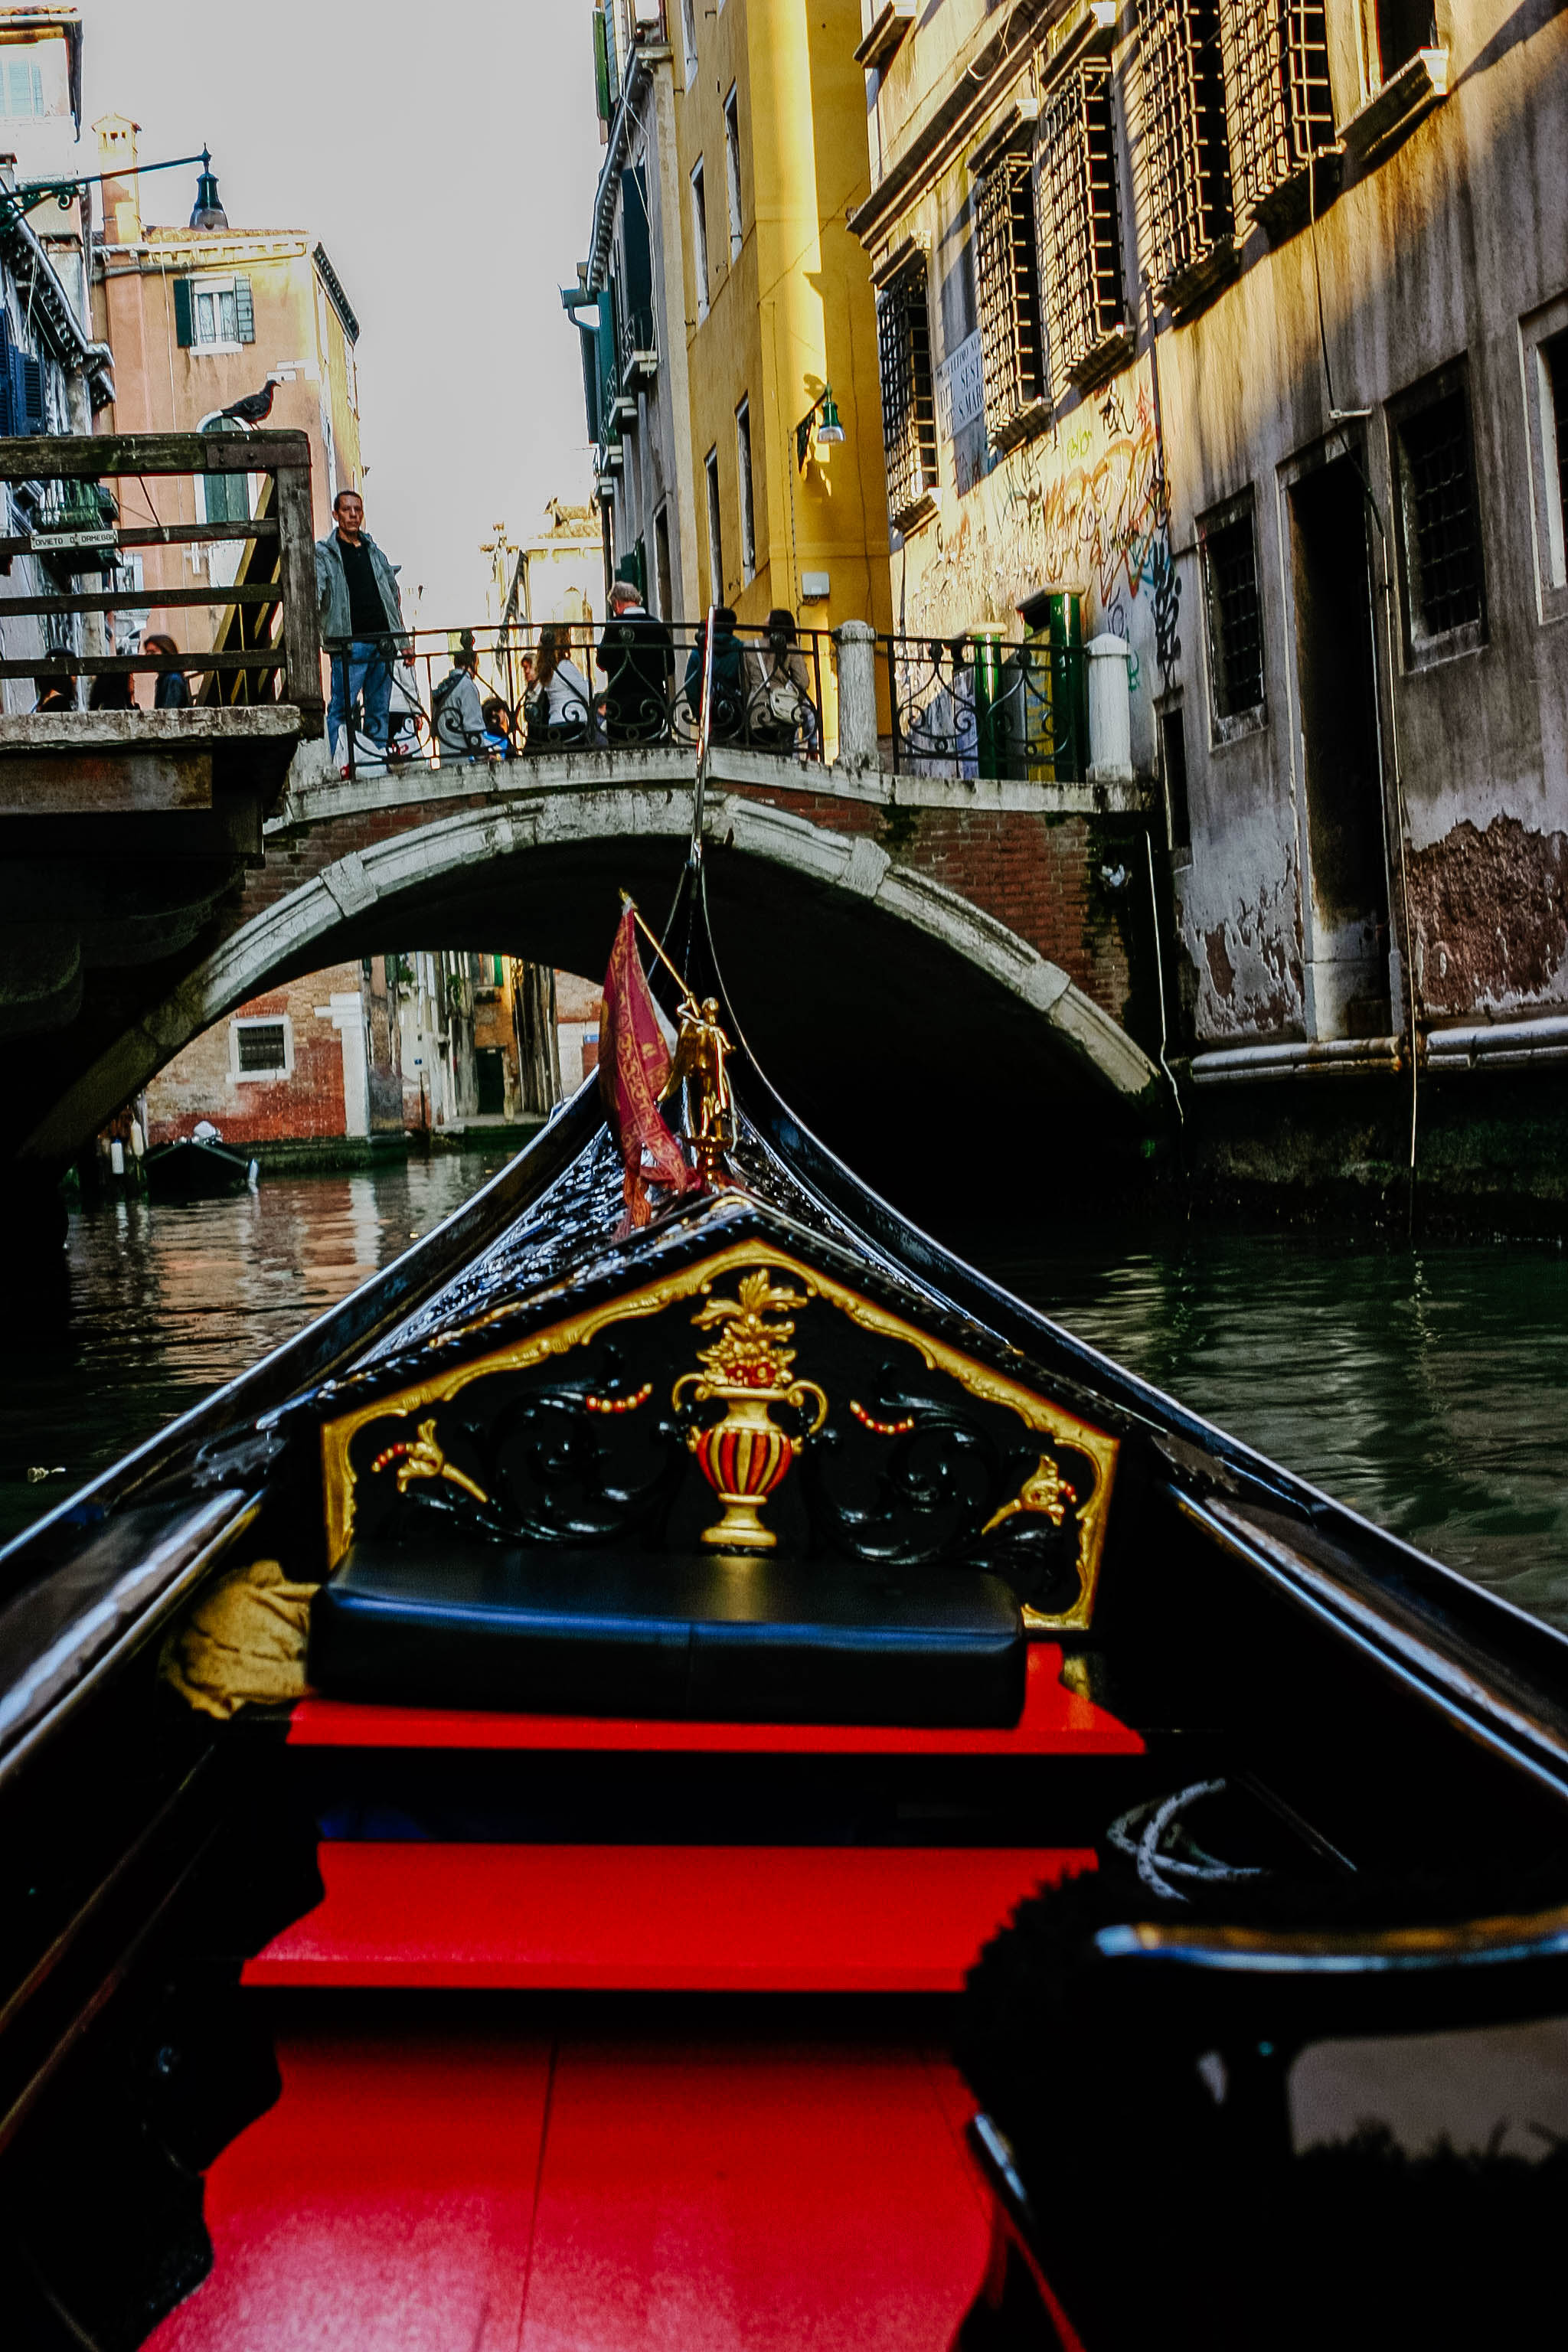 Experience all of Venice's beauty through this photo tour. Enjoy all of the most popular sights, off the beaten path canals and daily life of Venice with this photo tour. #venice #italy